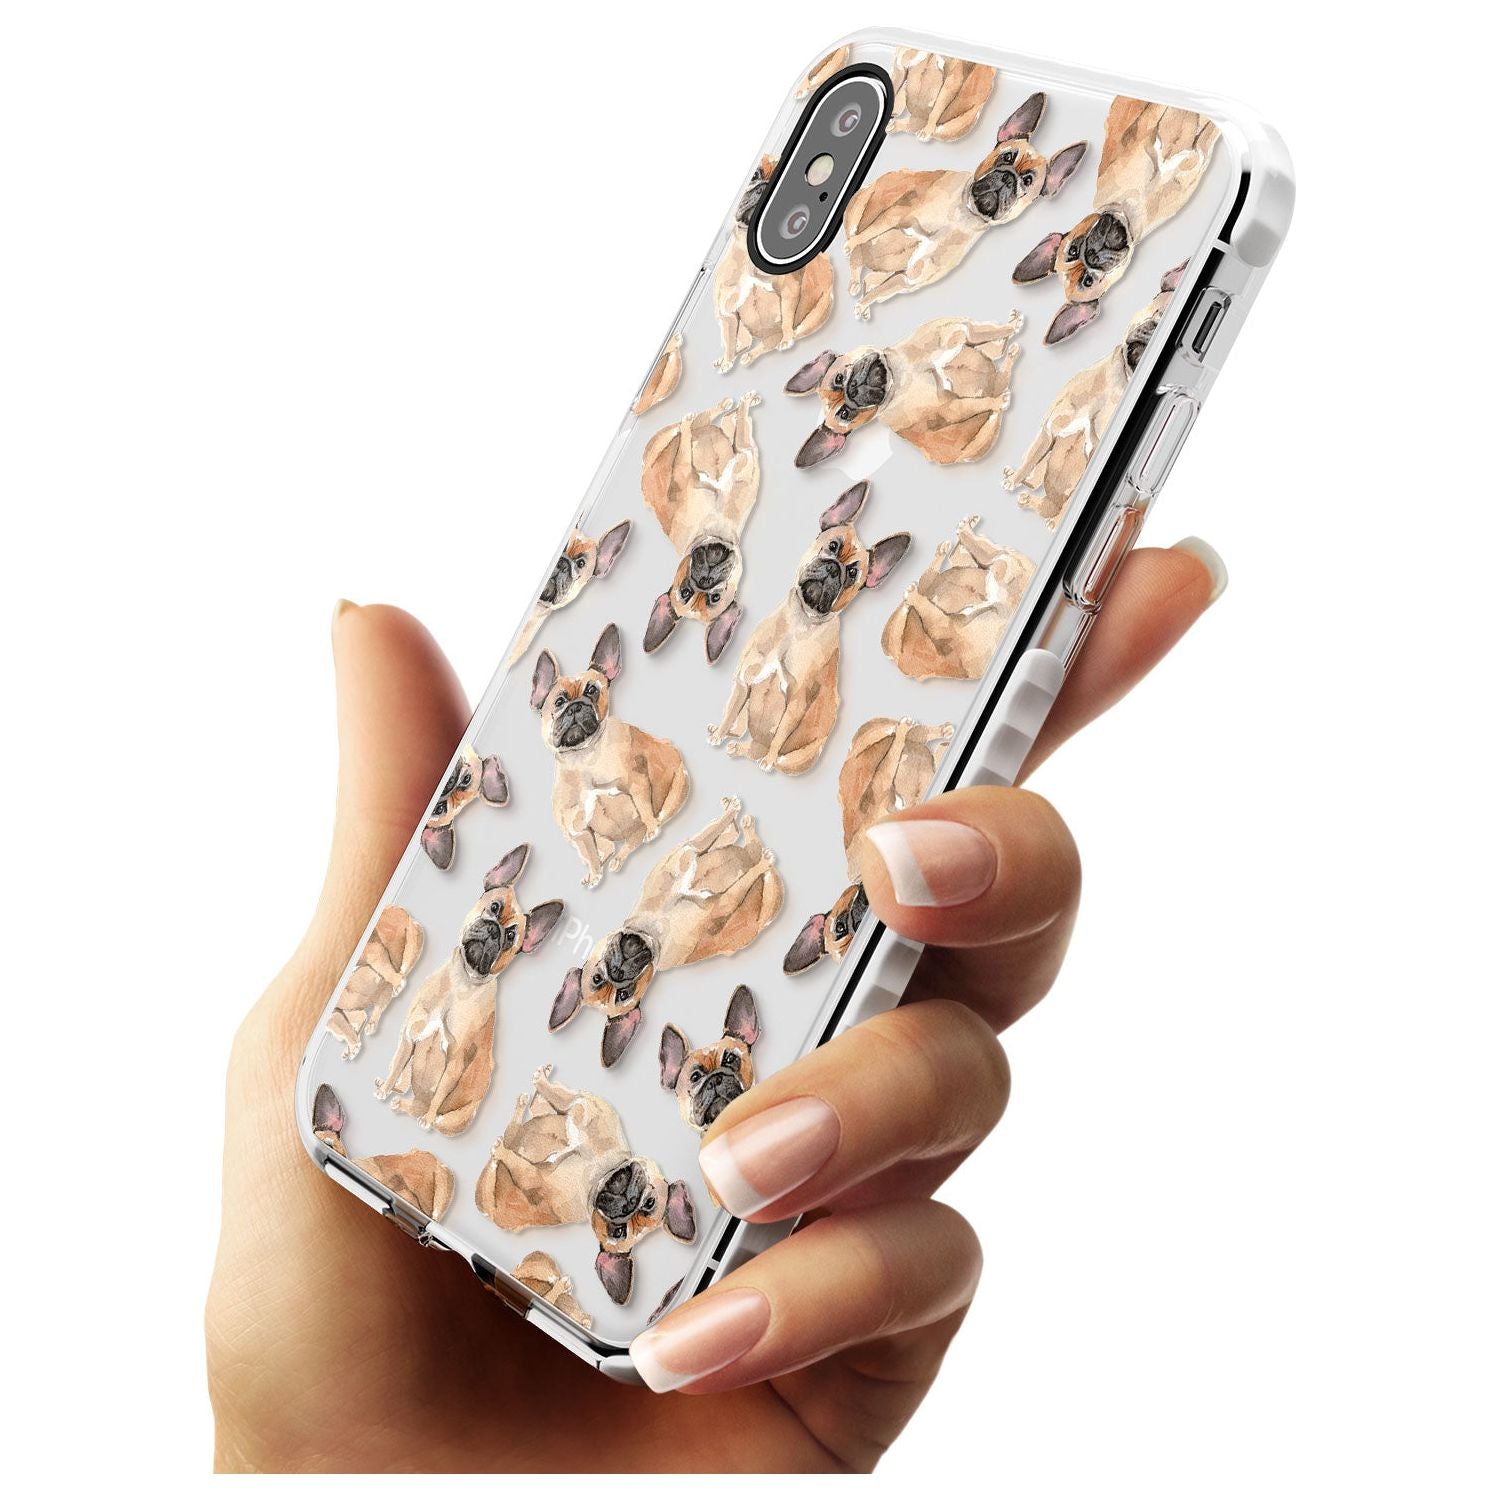 French Bulldog Watercolour Dog Pattern Impact Phone Case for iPhone X XS Max XR